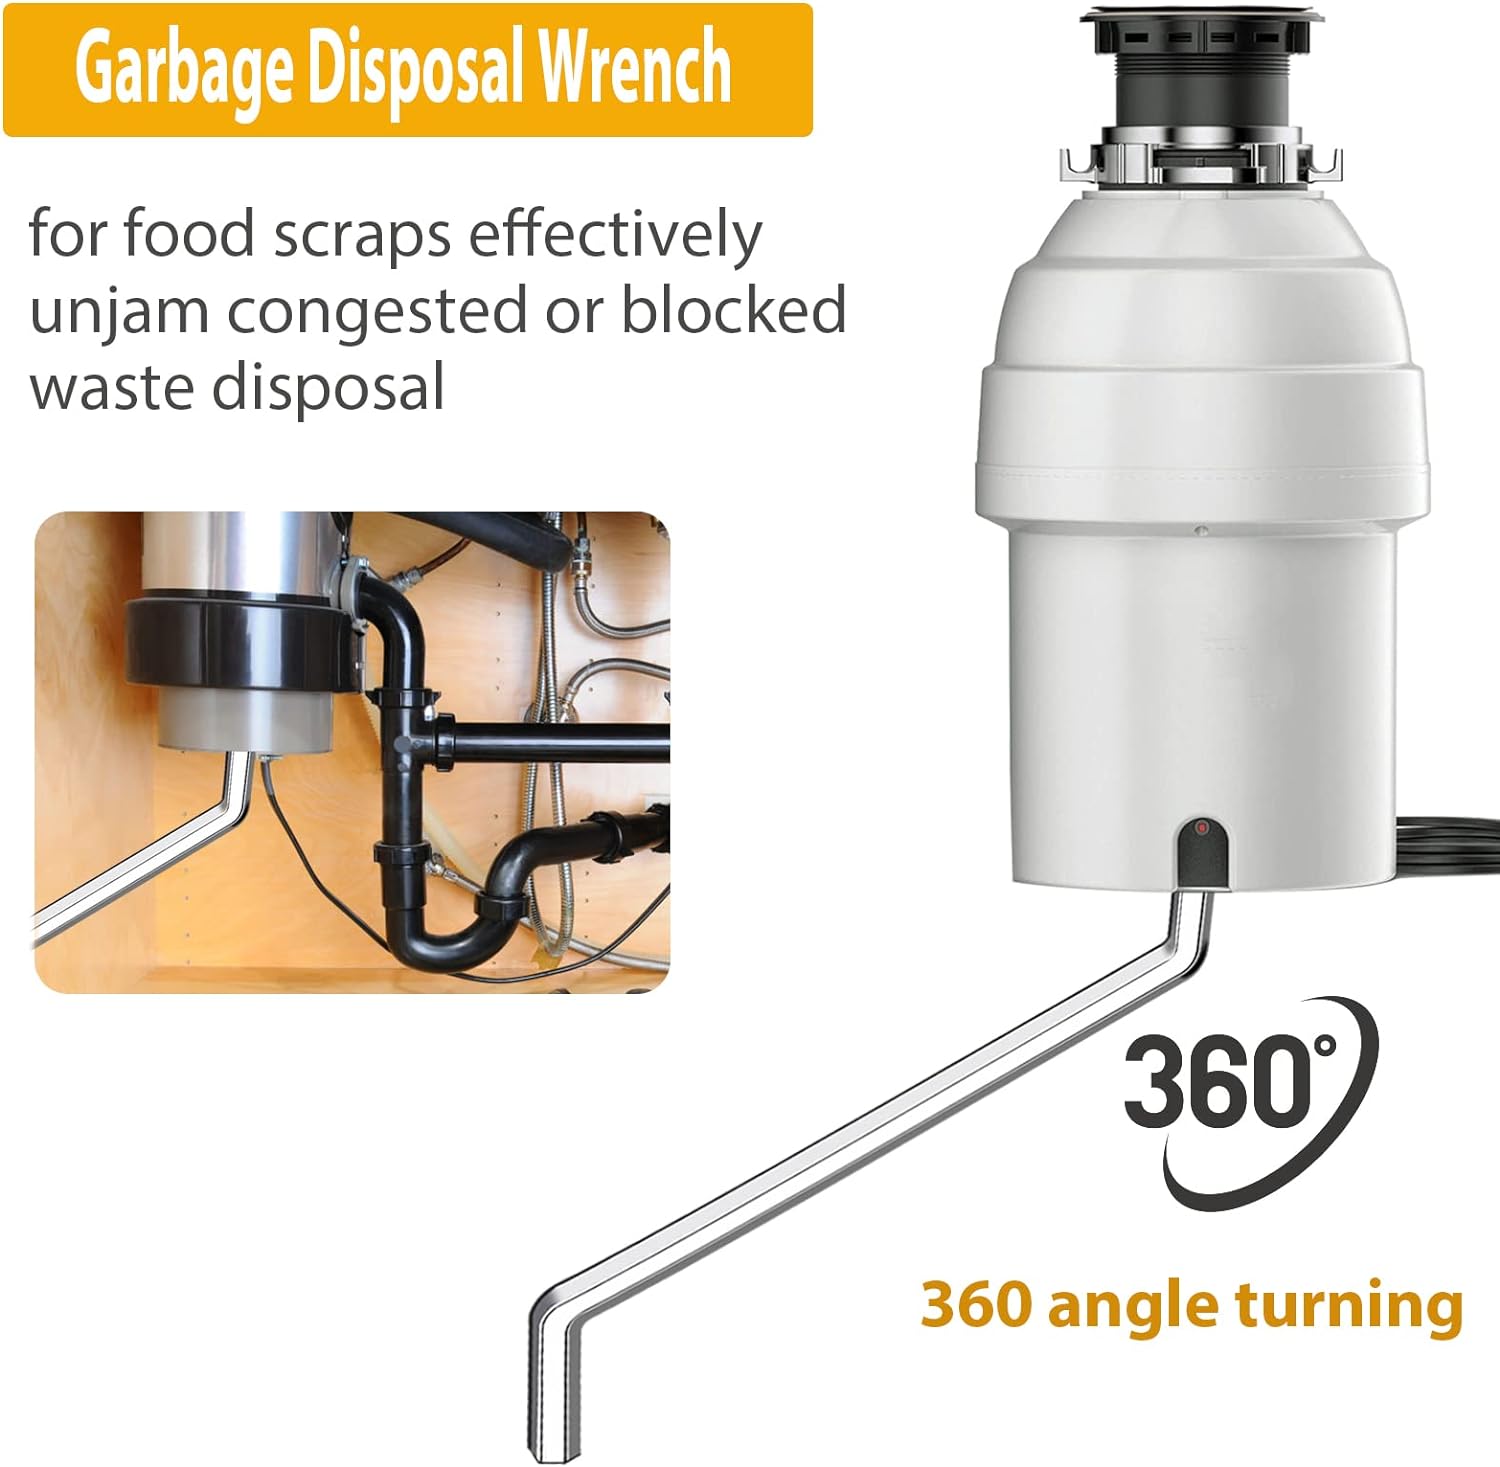 0158 Garbage Disposal Wrench, Garbage Disposal Allen Wrench Tool Compatible with InSinkErator Garbage Disposal for Un-Jam/Food Garba